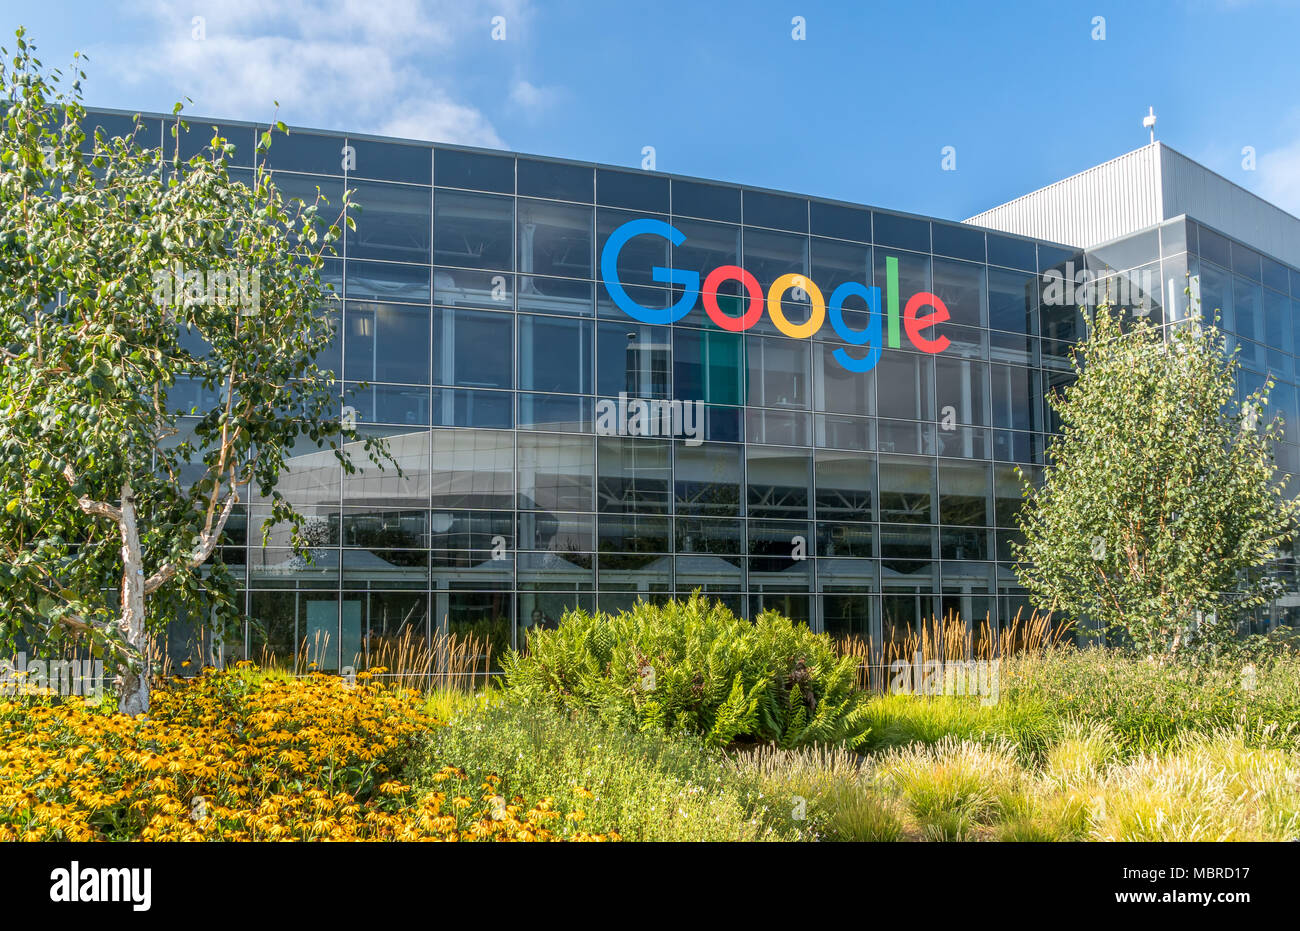 MOUNTAIN VIEW, CA/USA - JULY 30, 2017: Google corporate headquarters and logo. Stock Photo